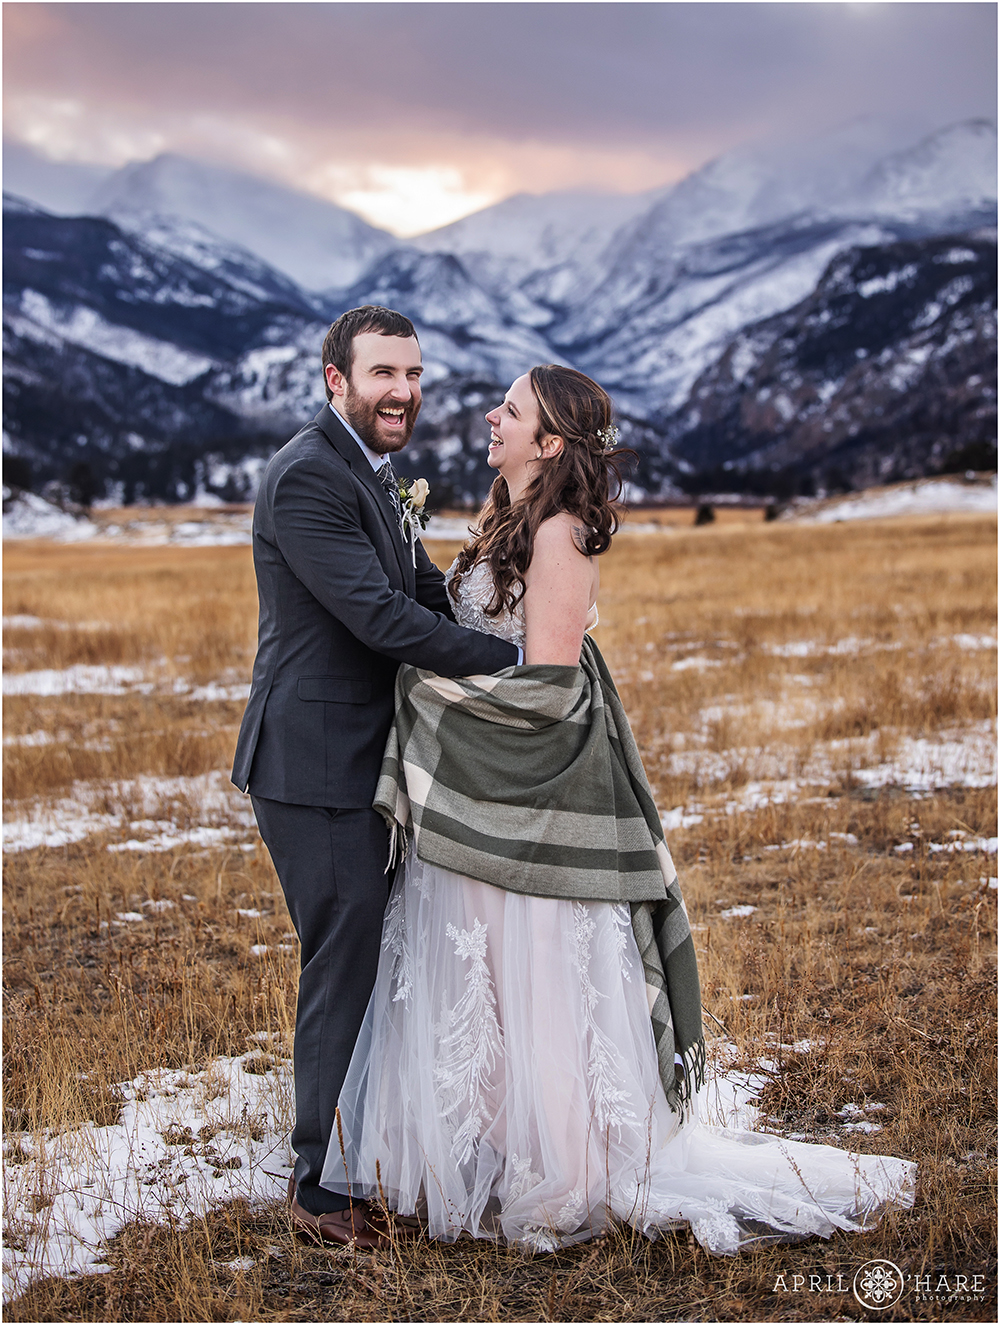 Groom cracks up with his bride as she looks at him in front of a gorgeous snowy mountain backdrop at sunset at RMNP